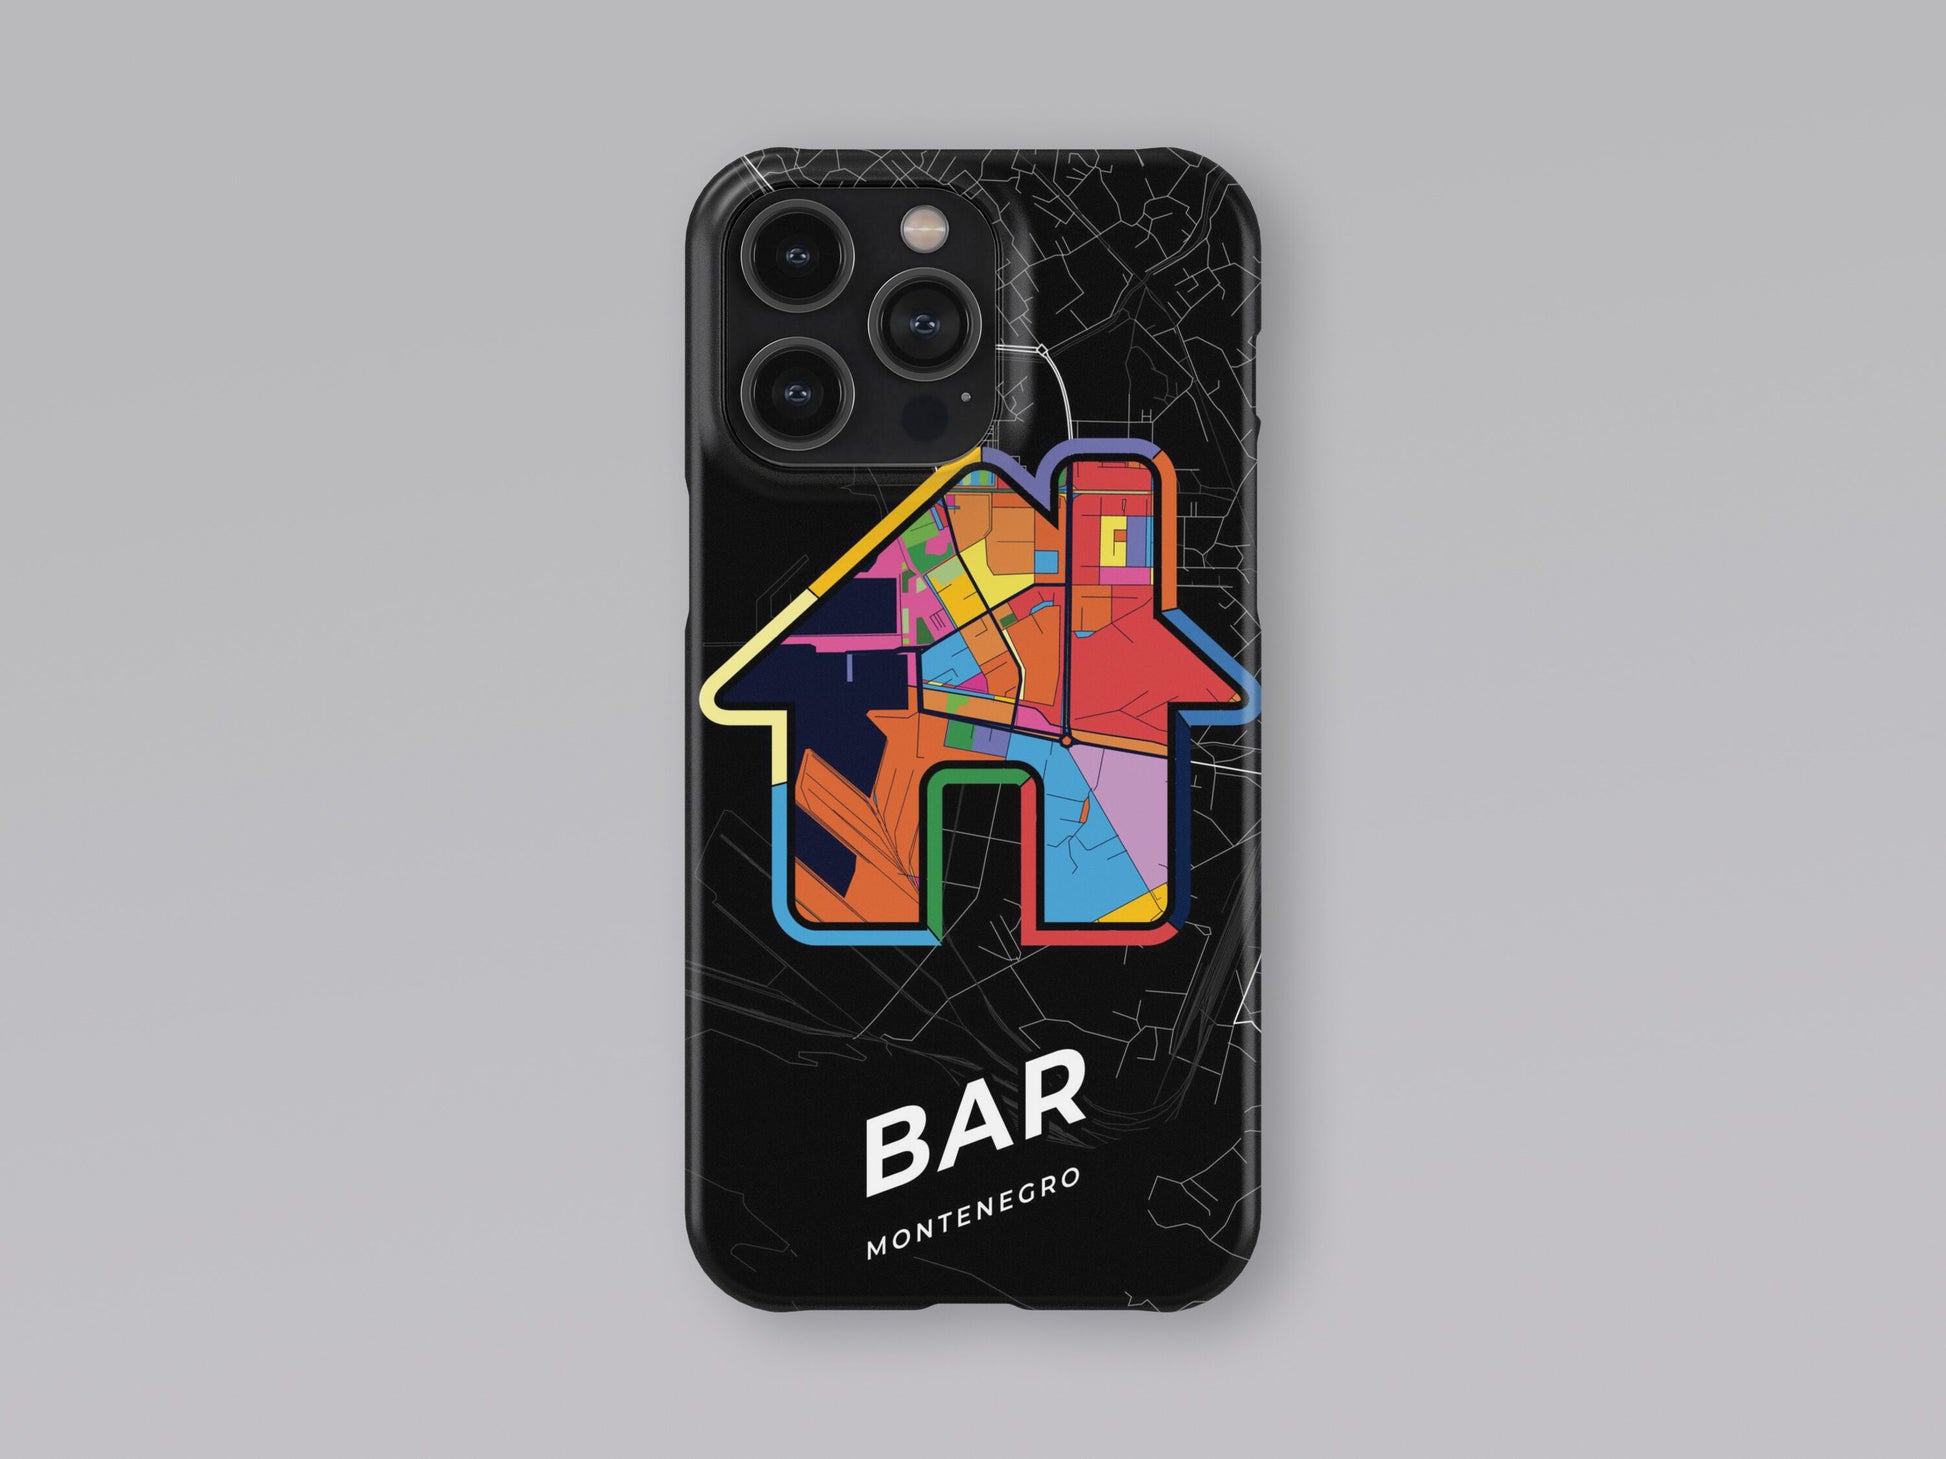 Bar Montenegro slim phone case with colorful icon. Birthday, wedding or housewarming gift. Couple match cases. 3